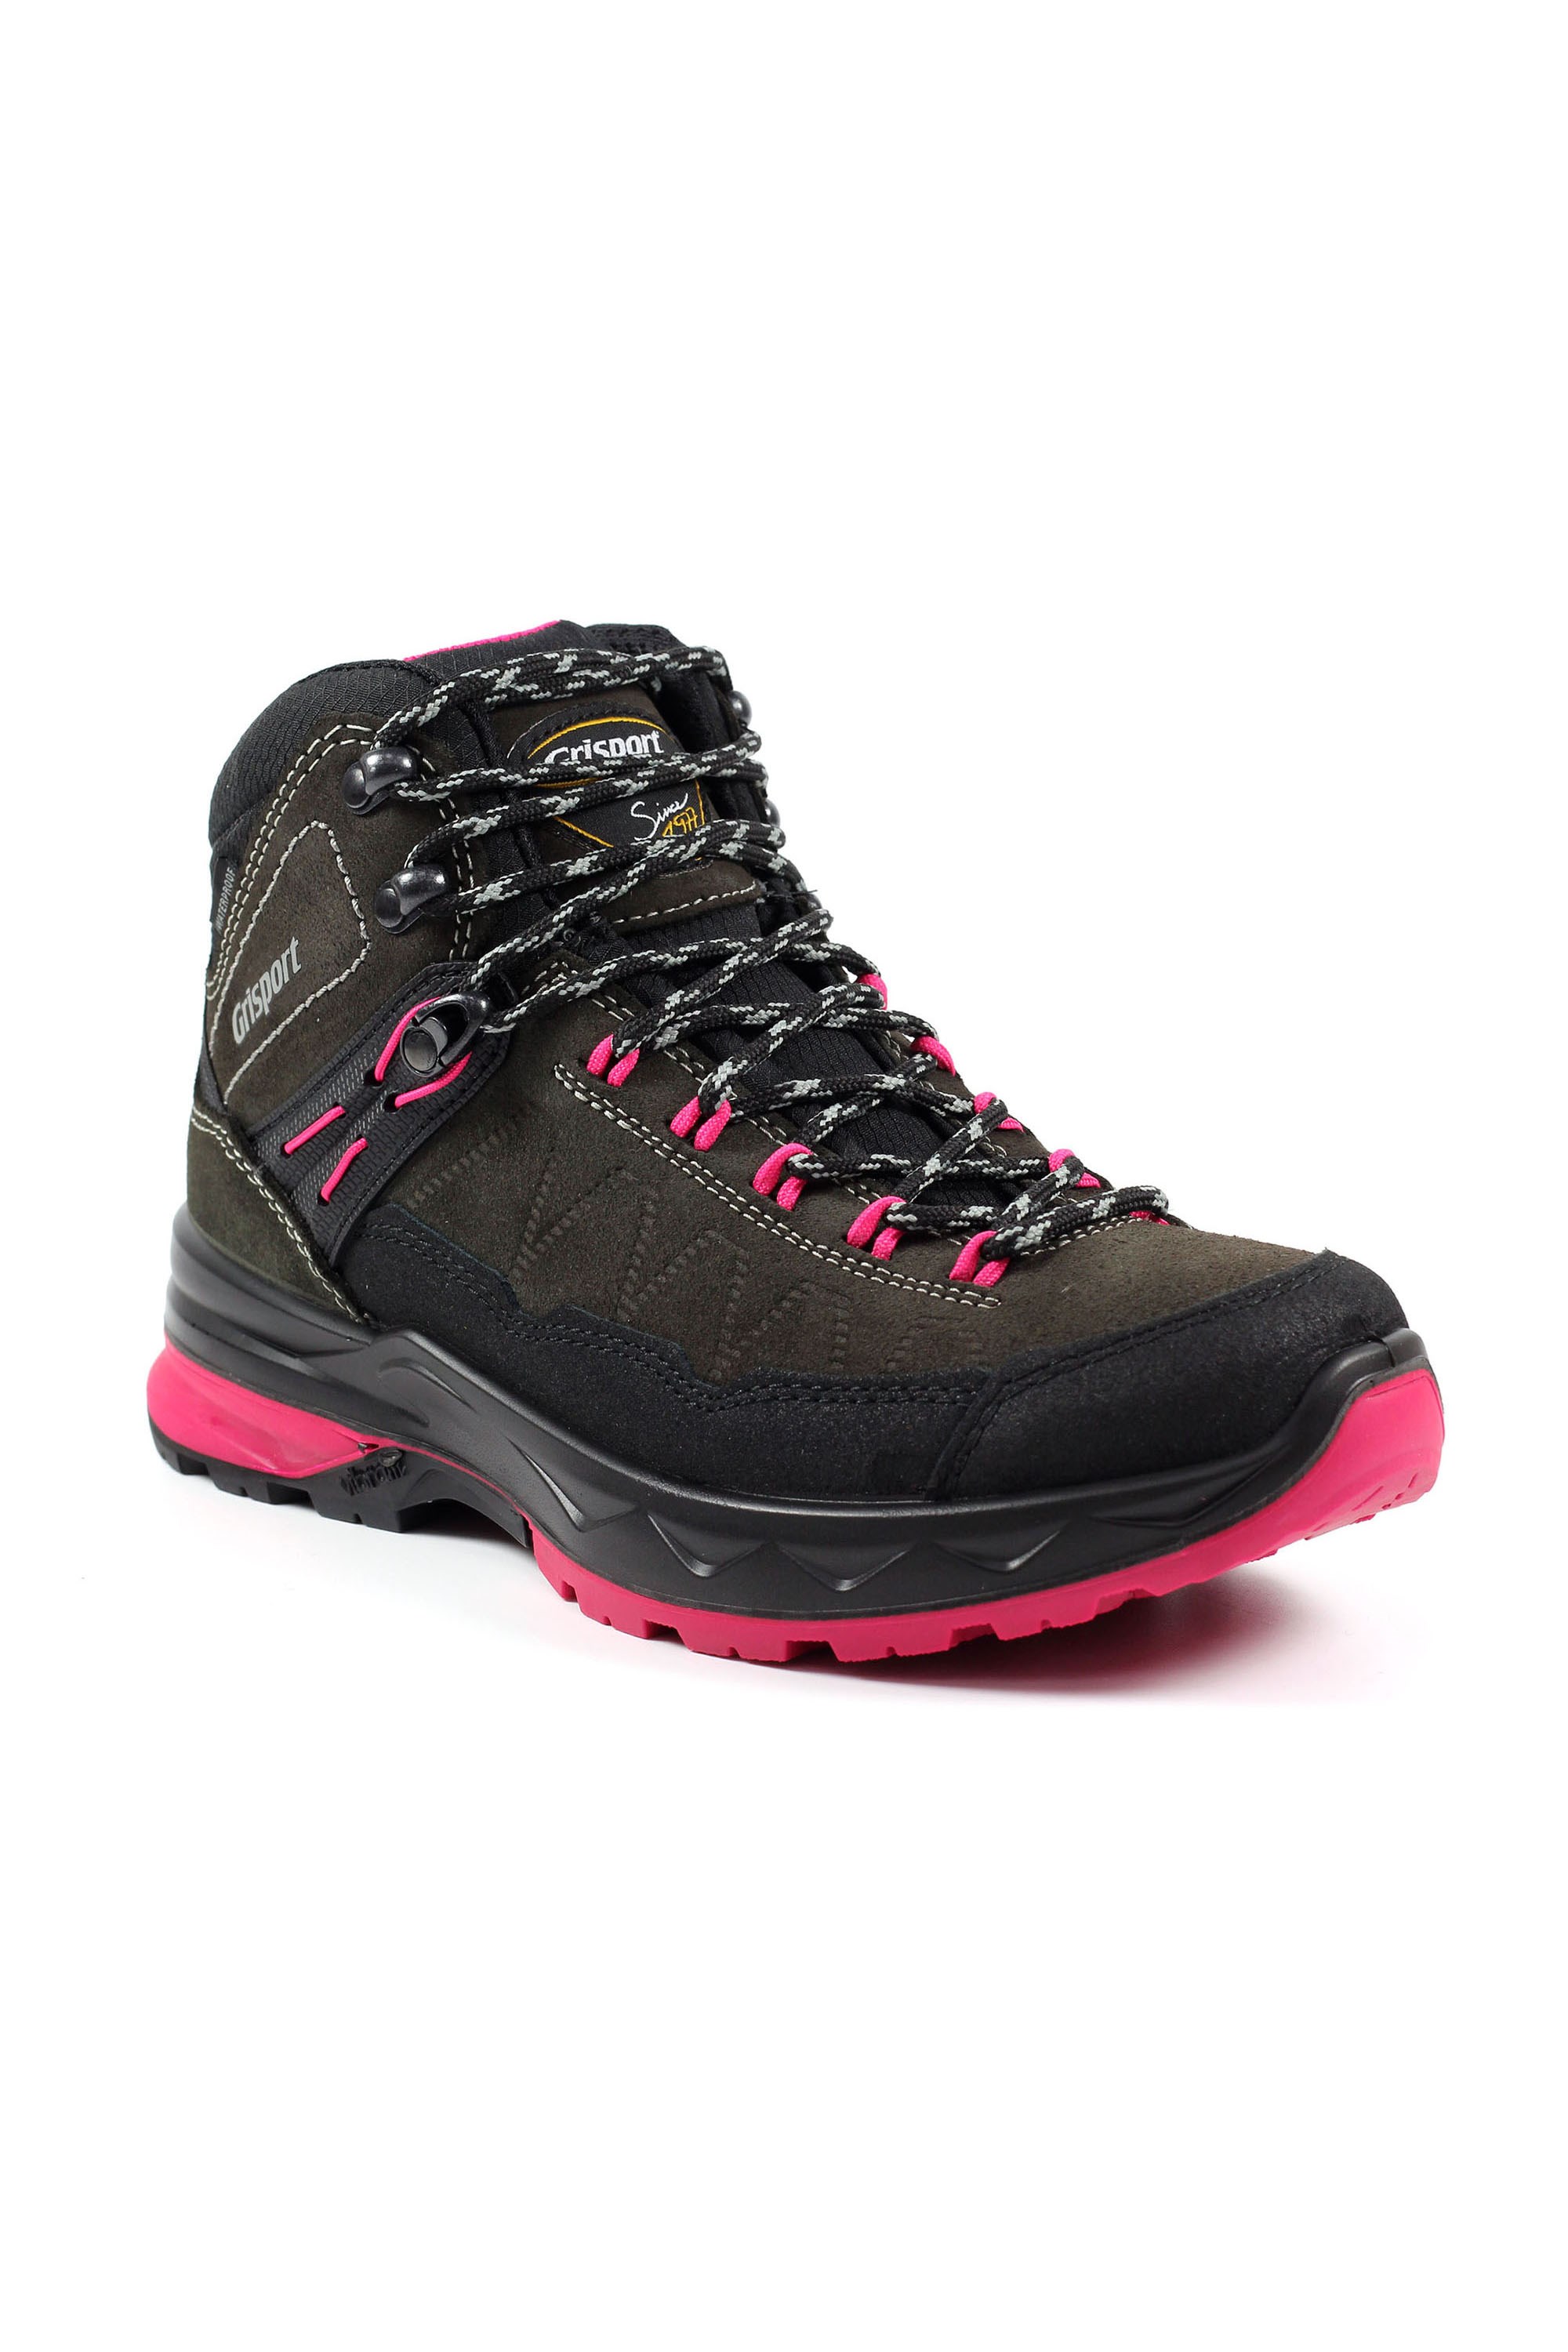 Coquetdale Womens Walking Boot -